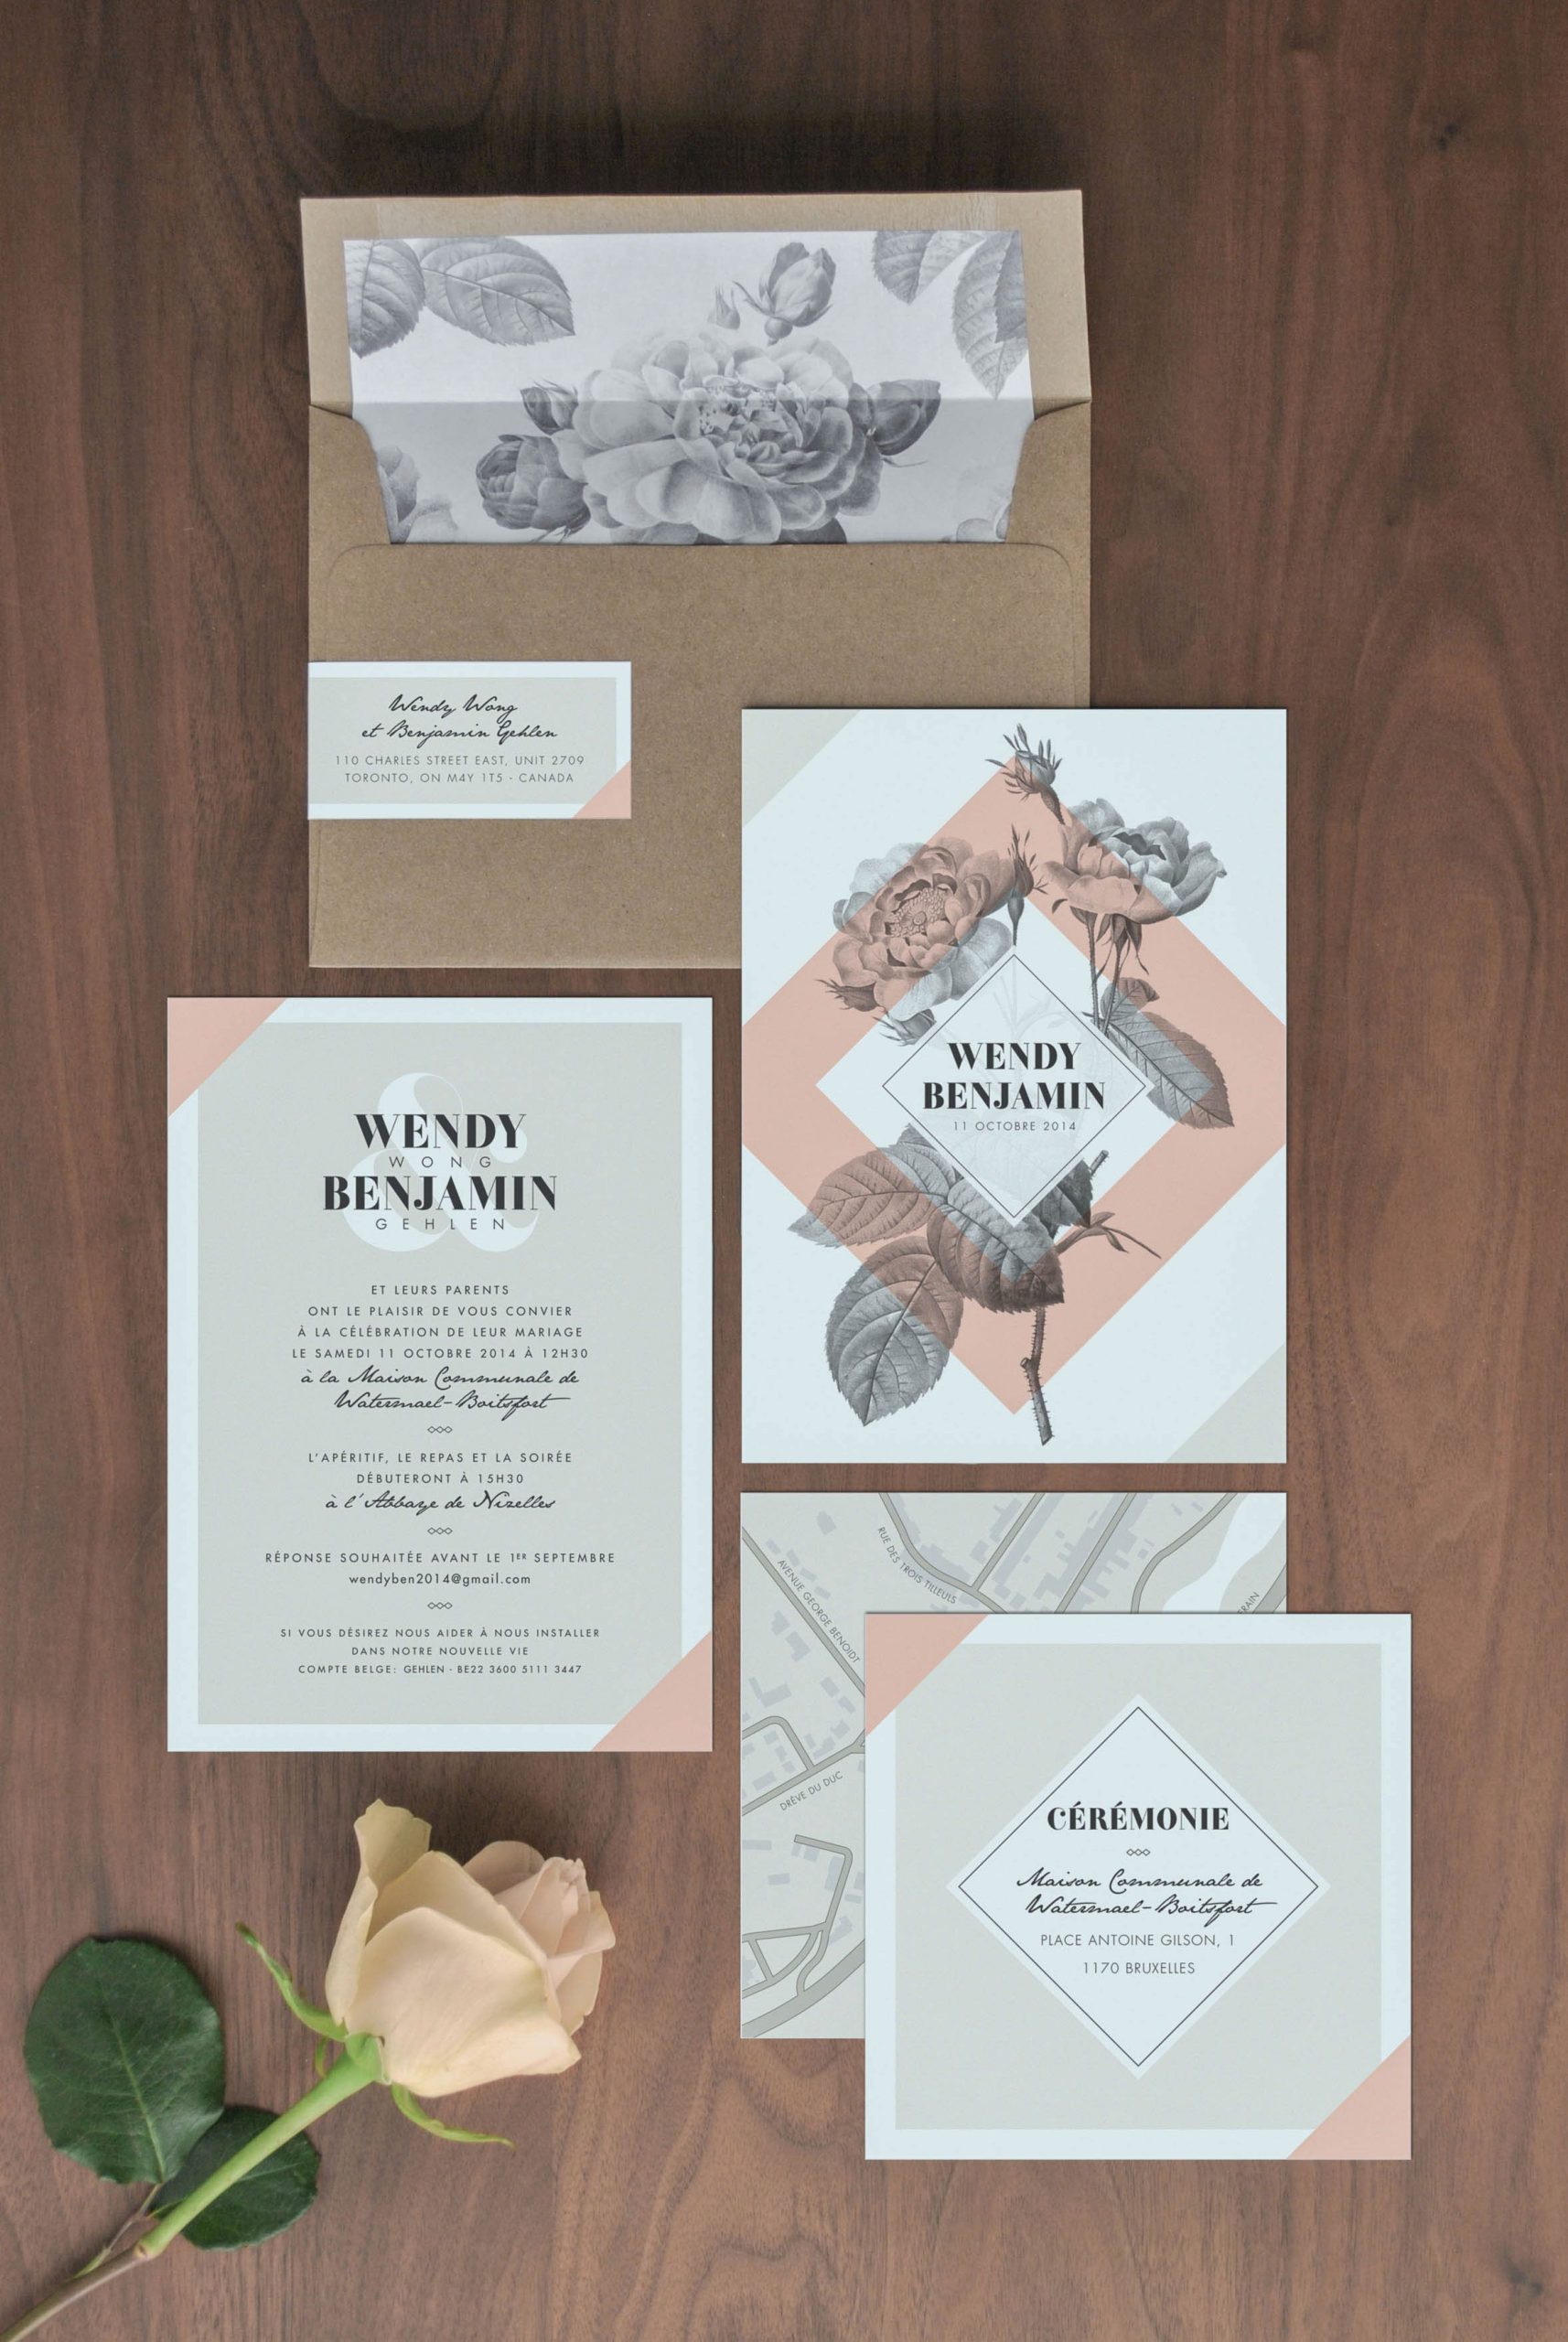 How Can I Design My Own Wedding Invitations